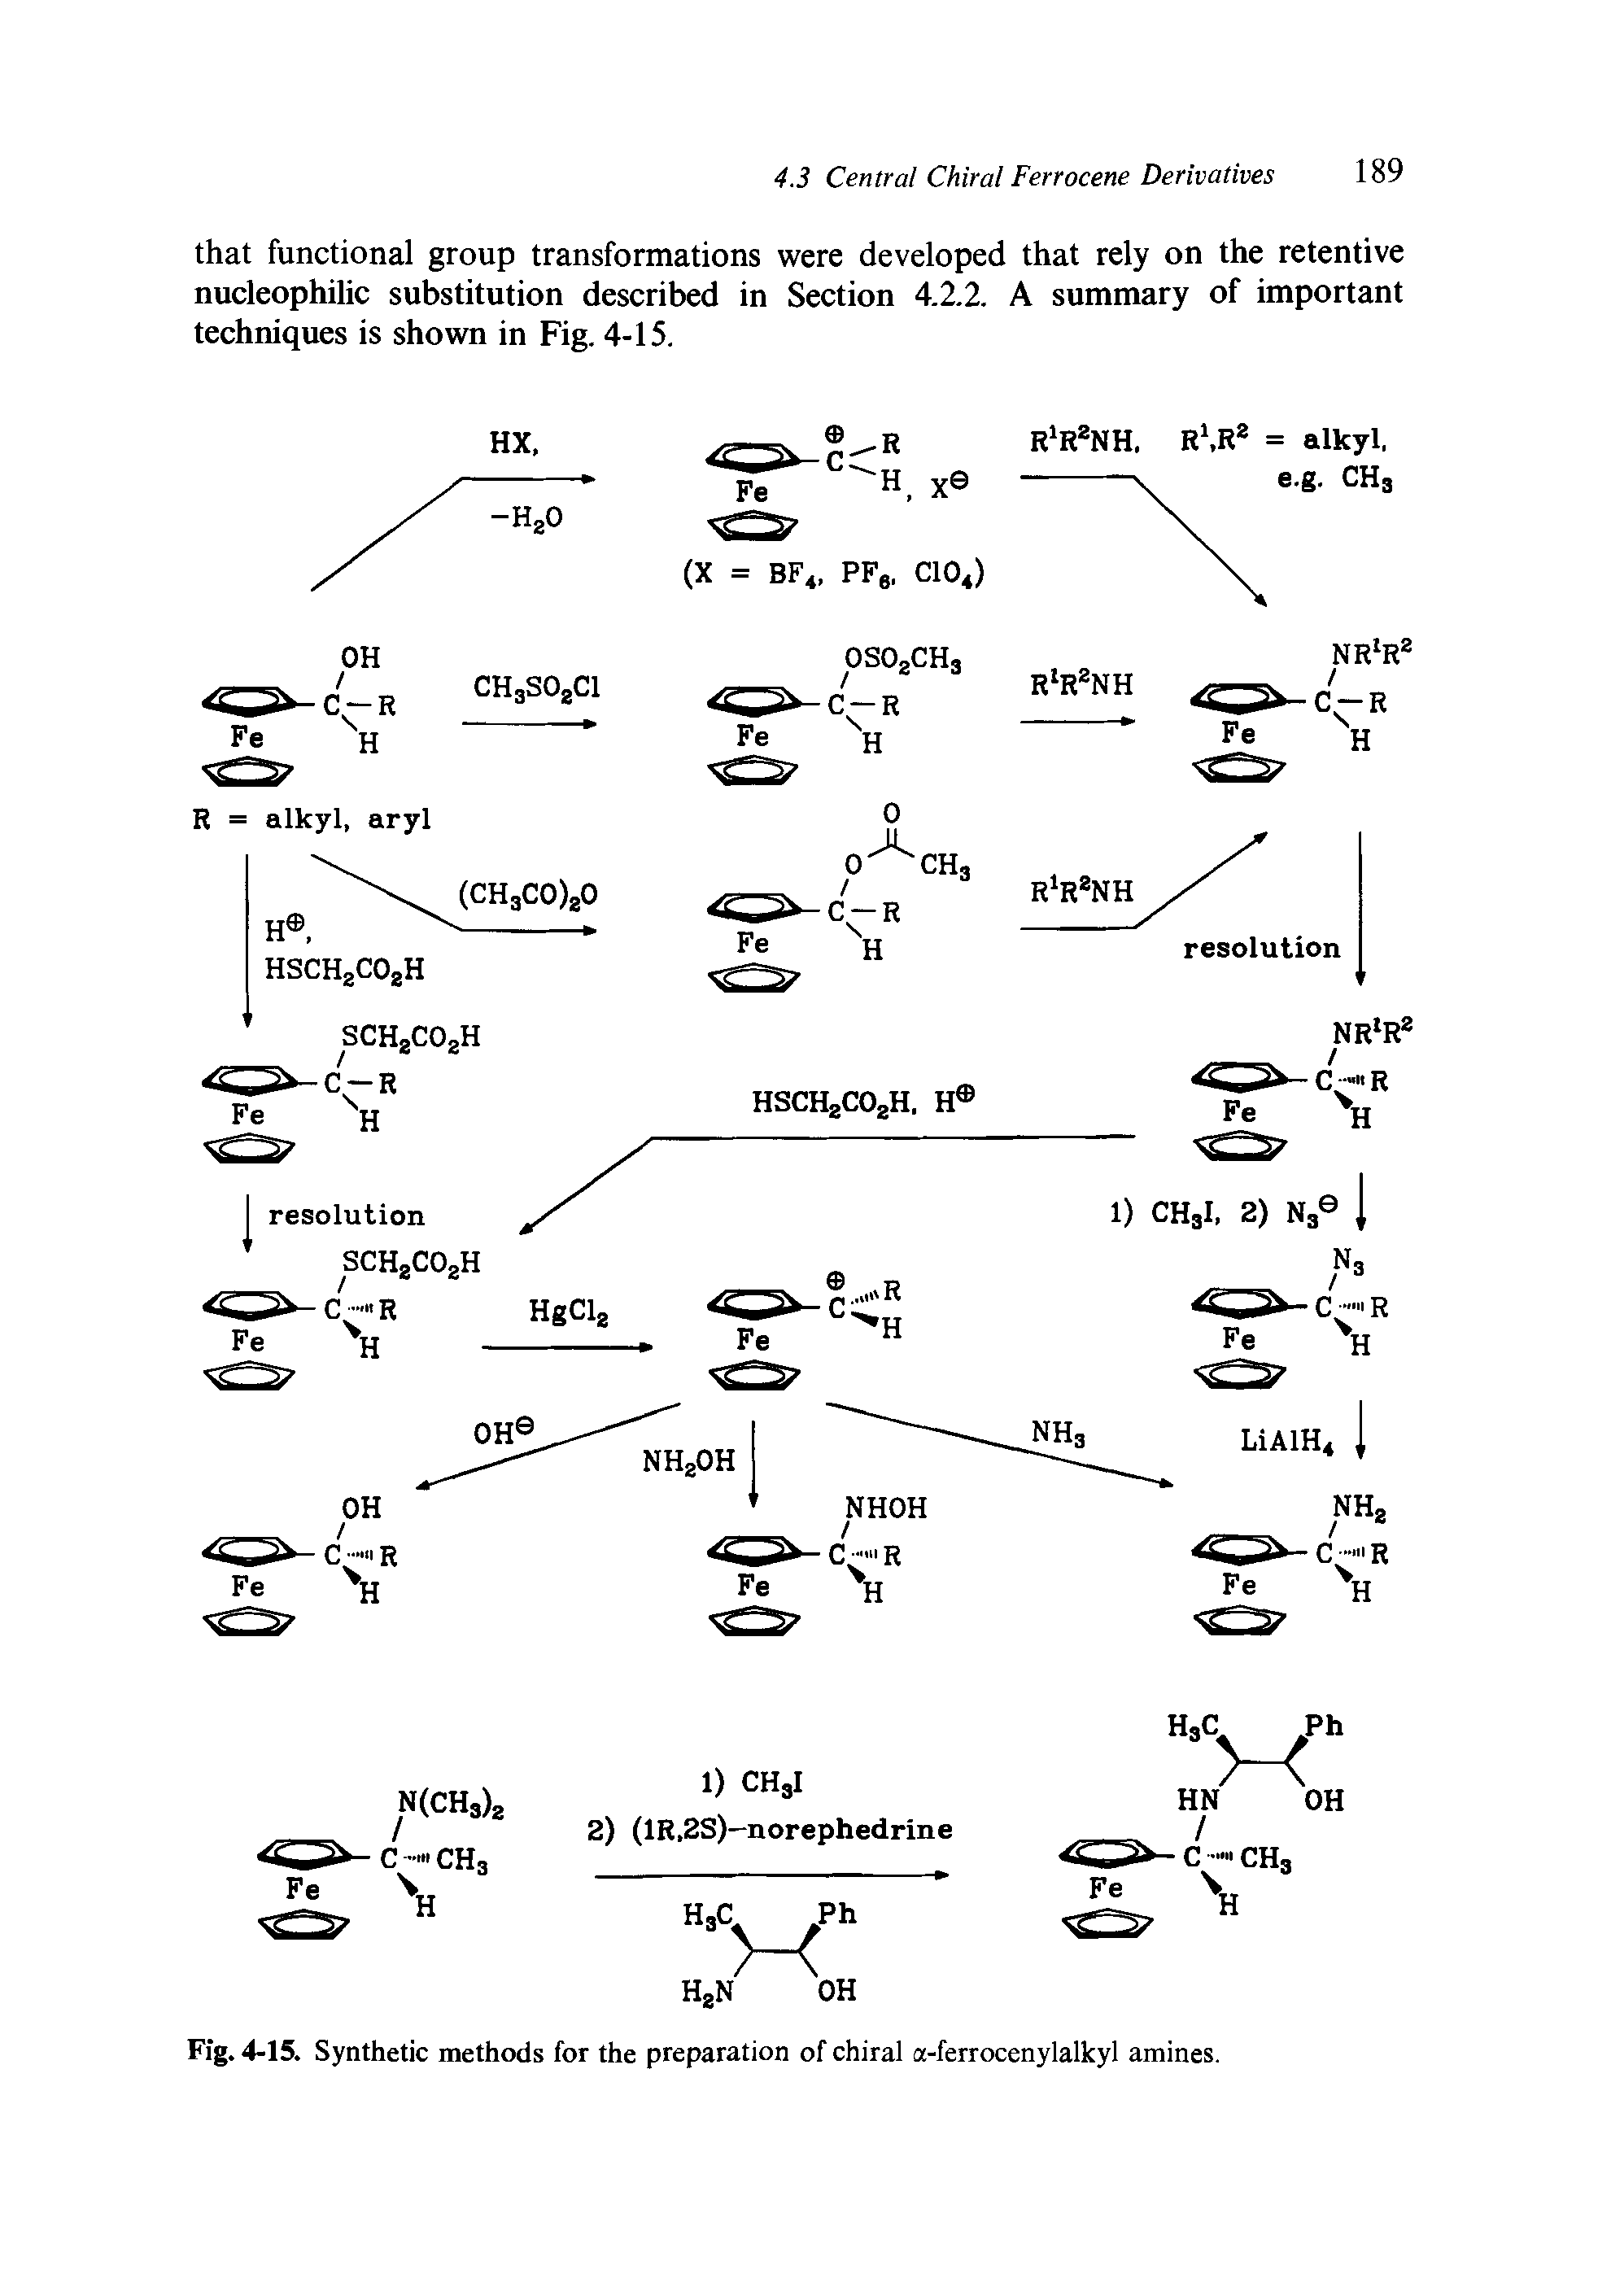 Fig. 4-15. Synthetic methods for the preparation of chiral a-ferrocenylalkyl amines.